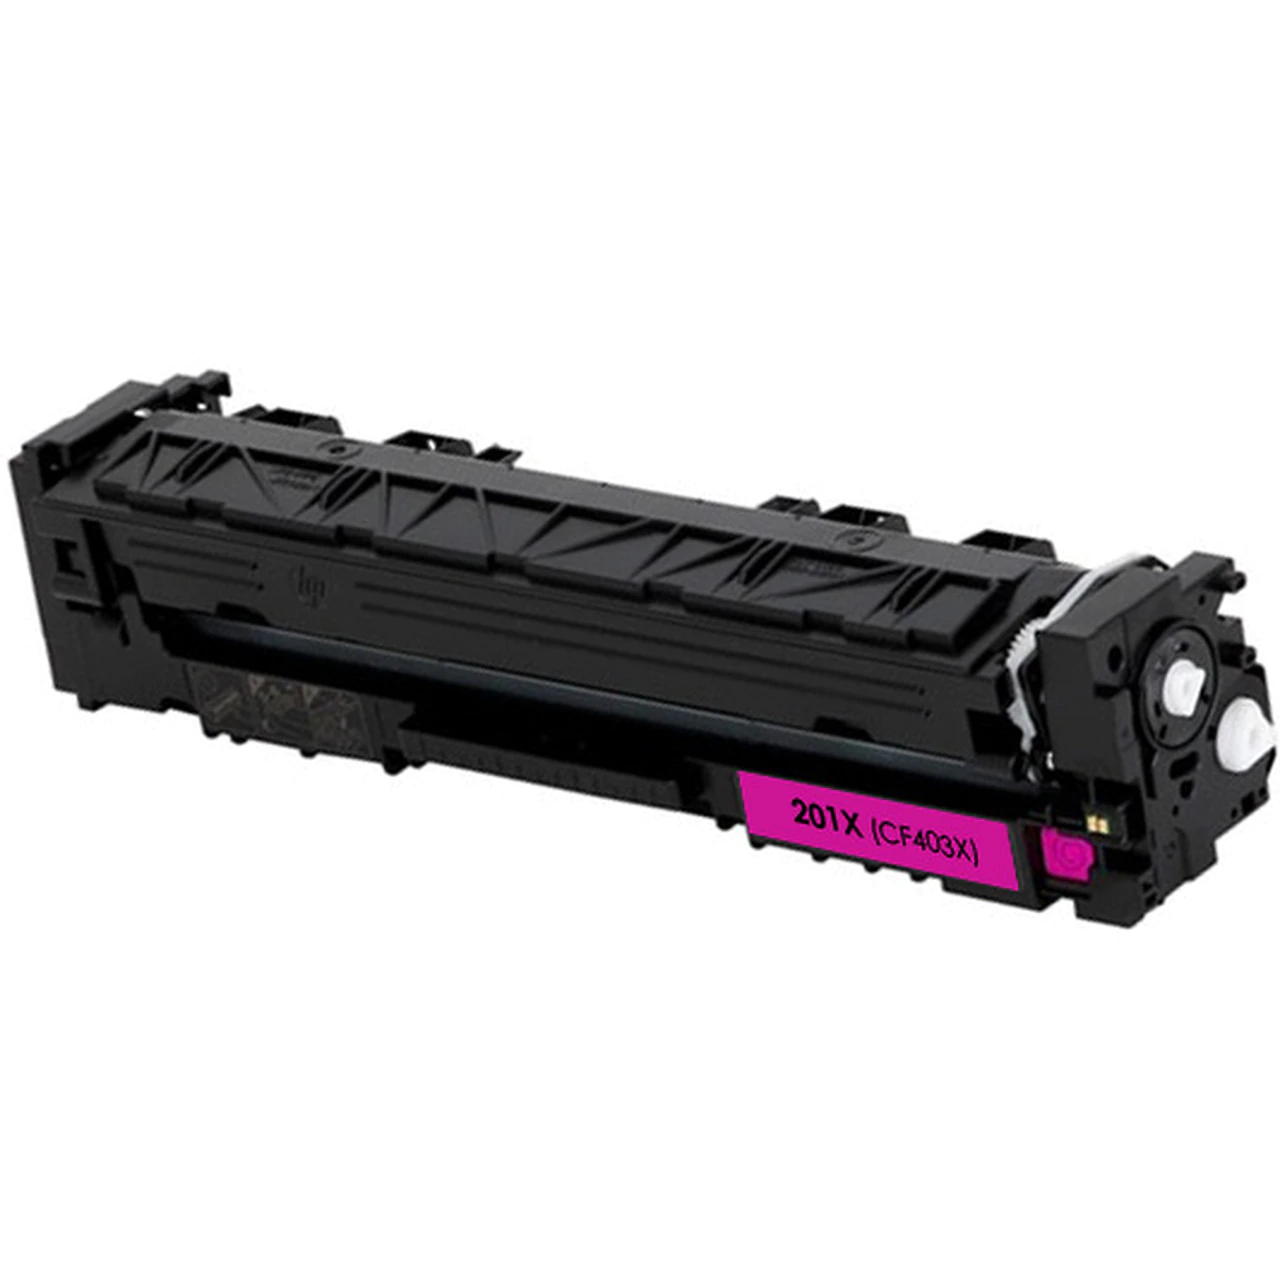 HP 201X Compatible Magenta Toner Cartridge, High Yield, 2,300 Page Yield - TON-CF403X-CPT